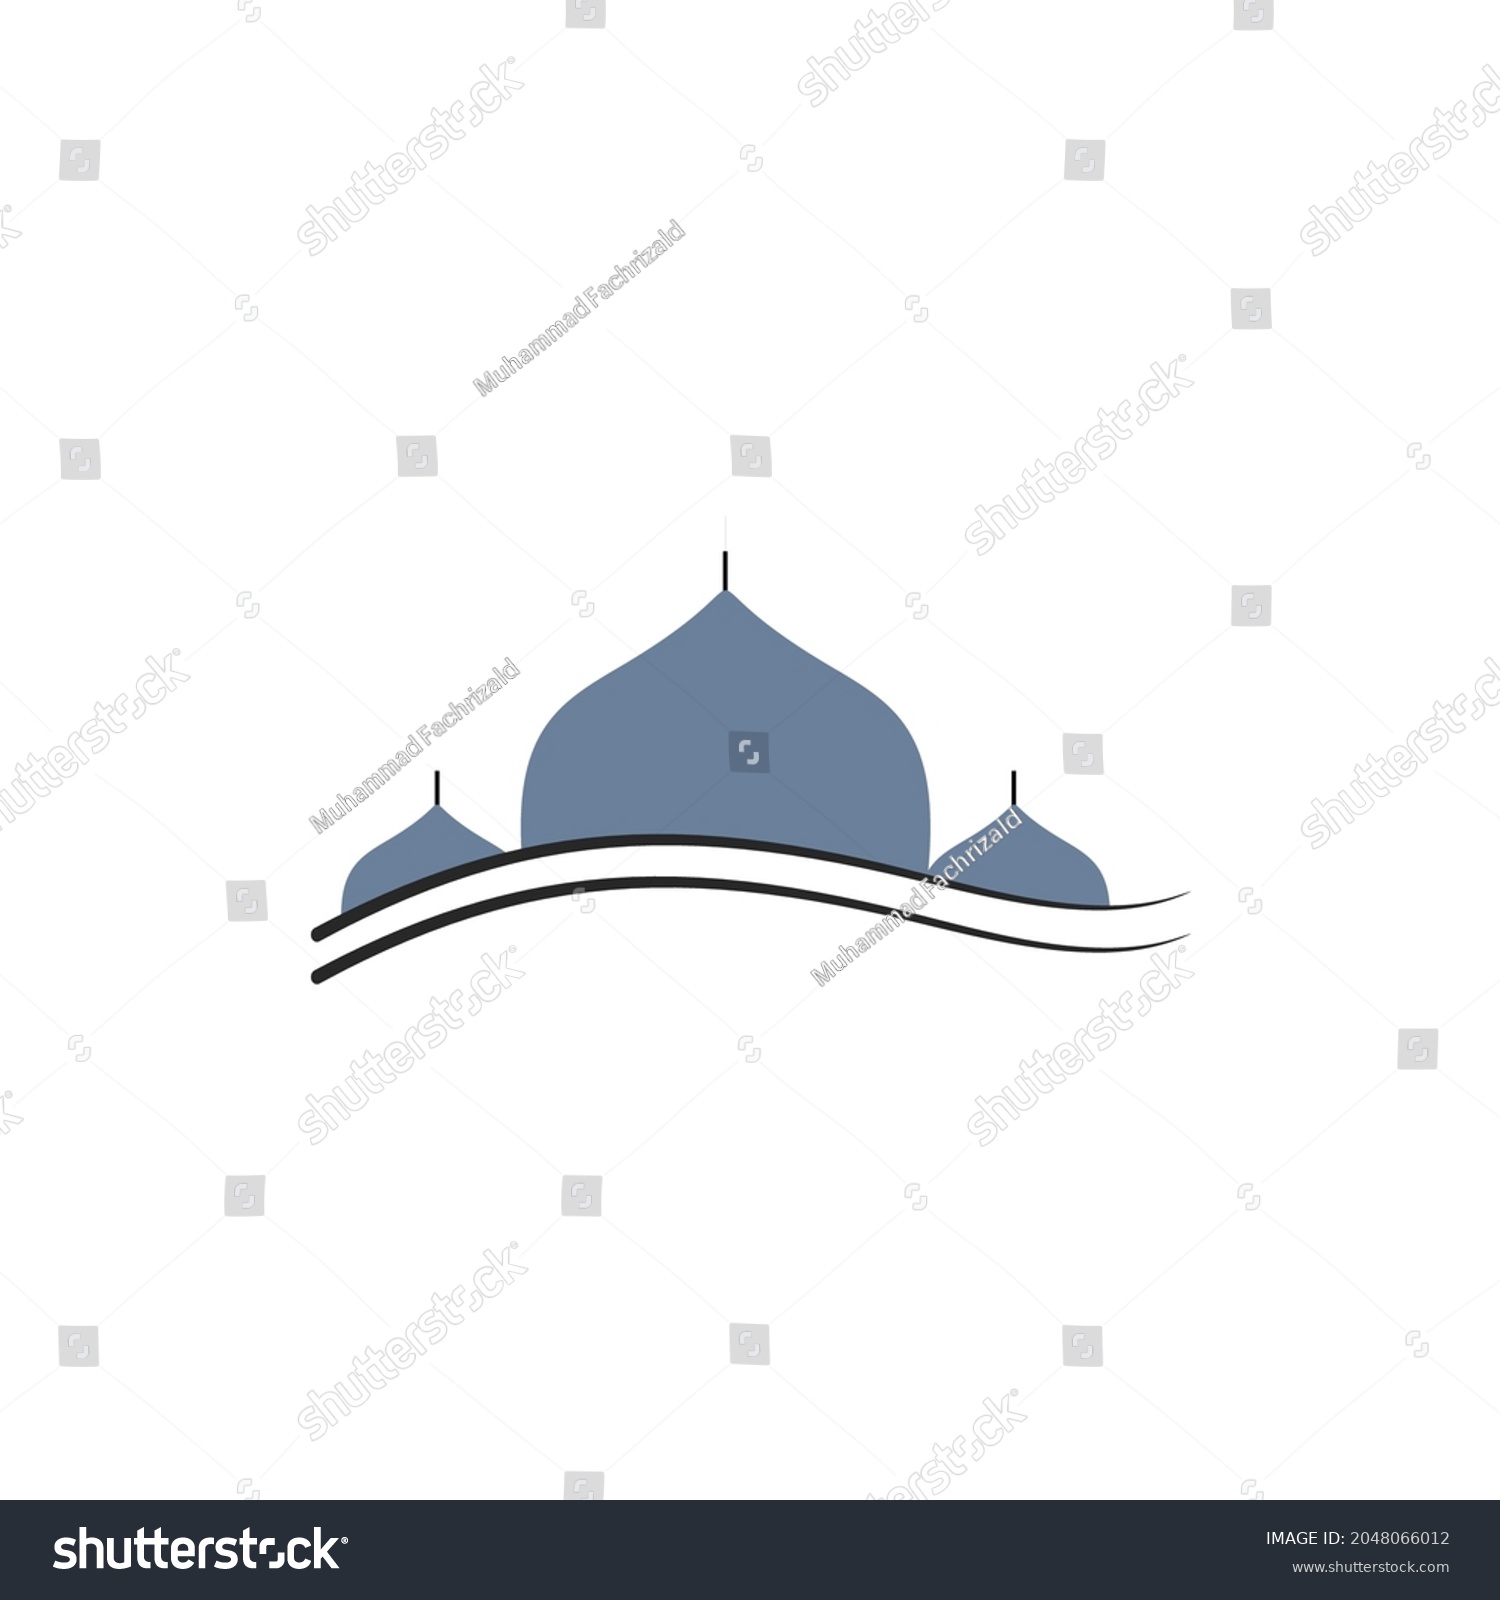 SVG of illustration of a mosque dome with water ornaments, a beautiful aceh baiturrahman mosque, a simple logo of a mosque dome, masjid baiturrahman svg